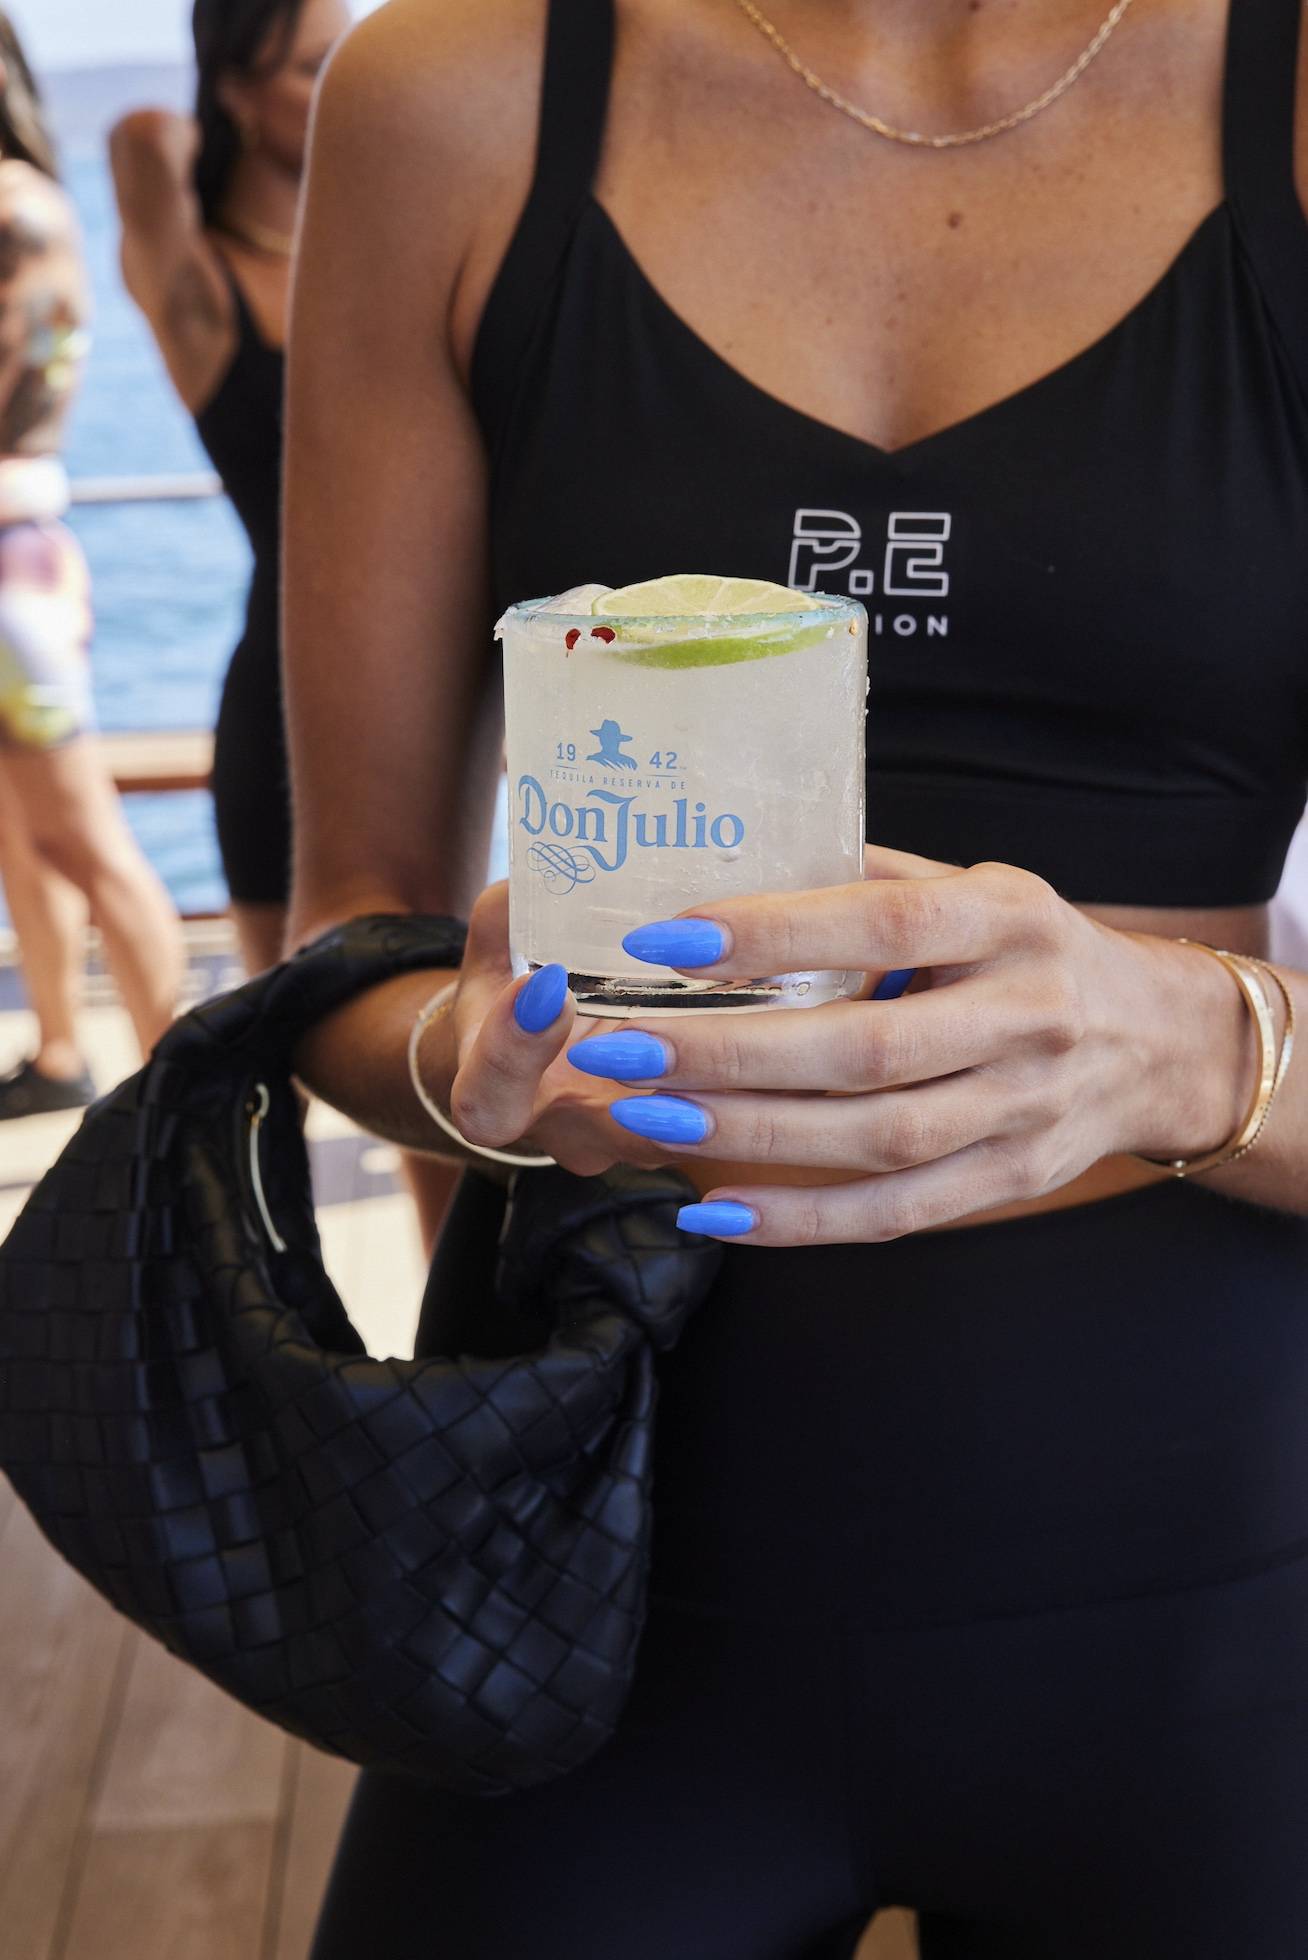 Custom Don Julio cocktails were served throughout the day